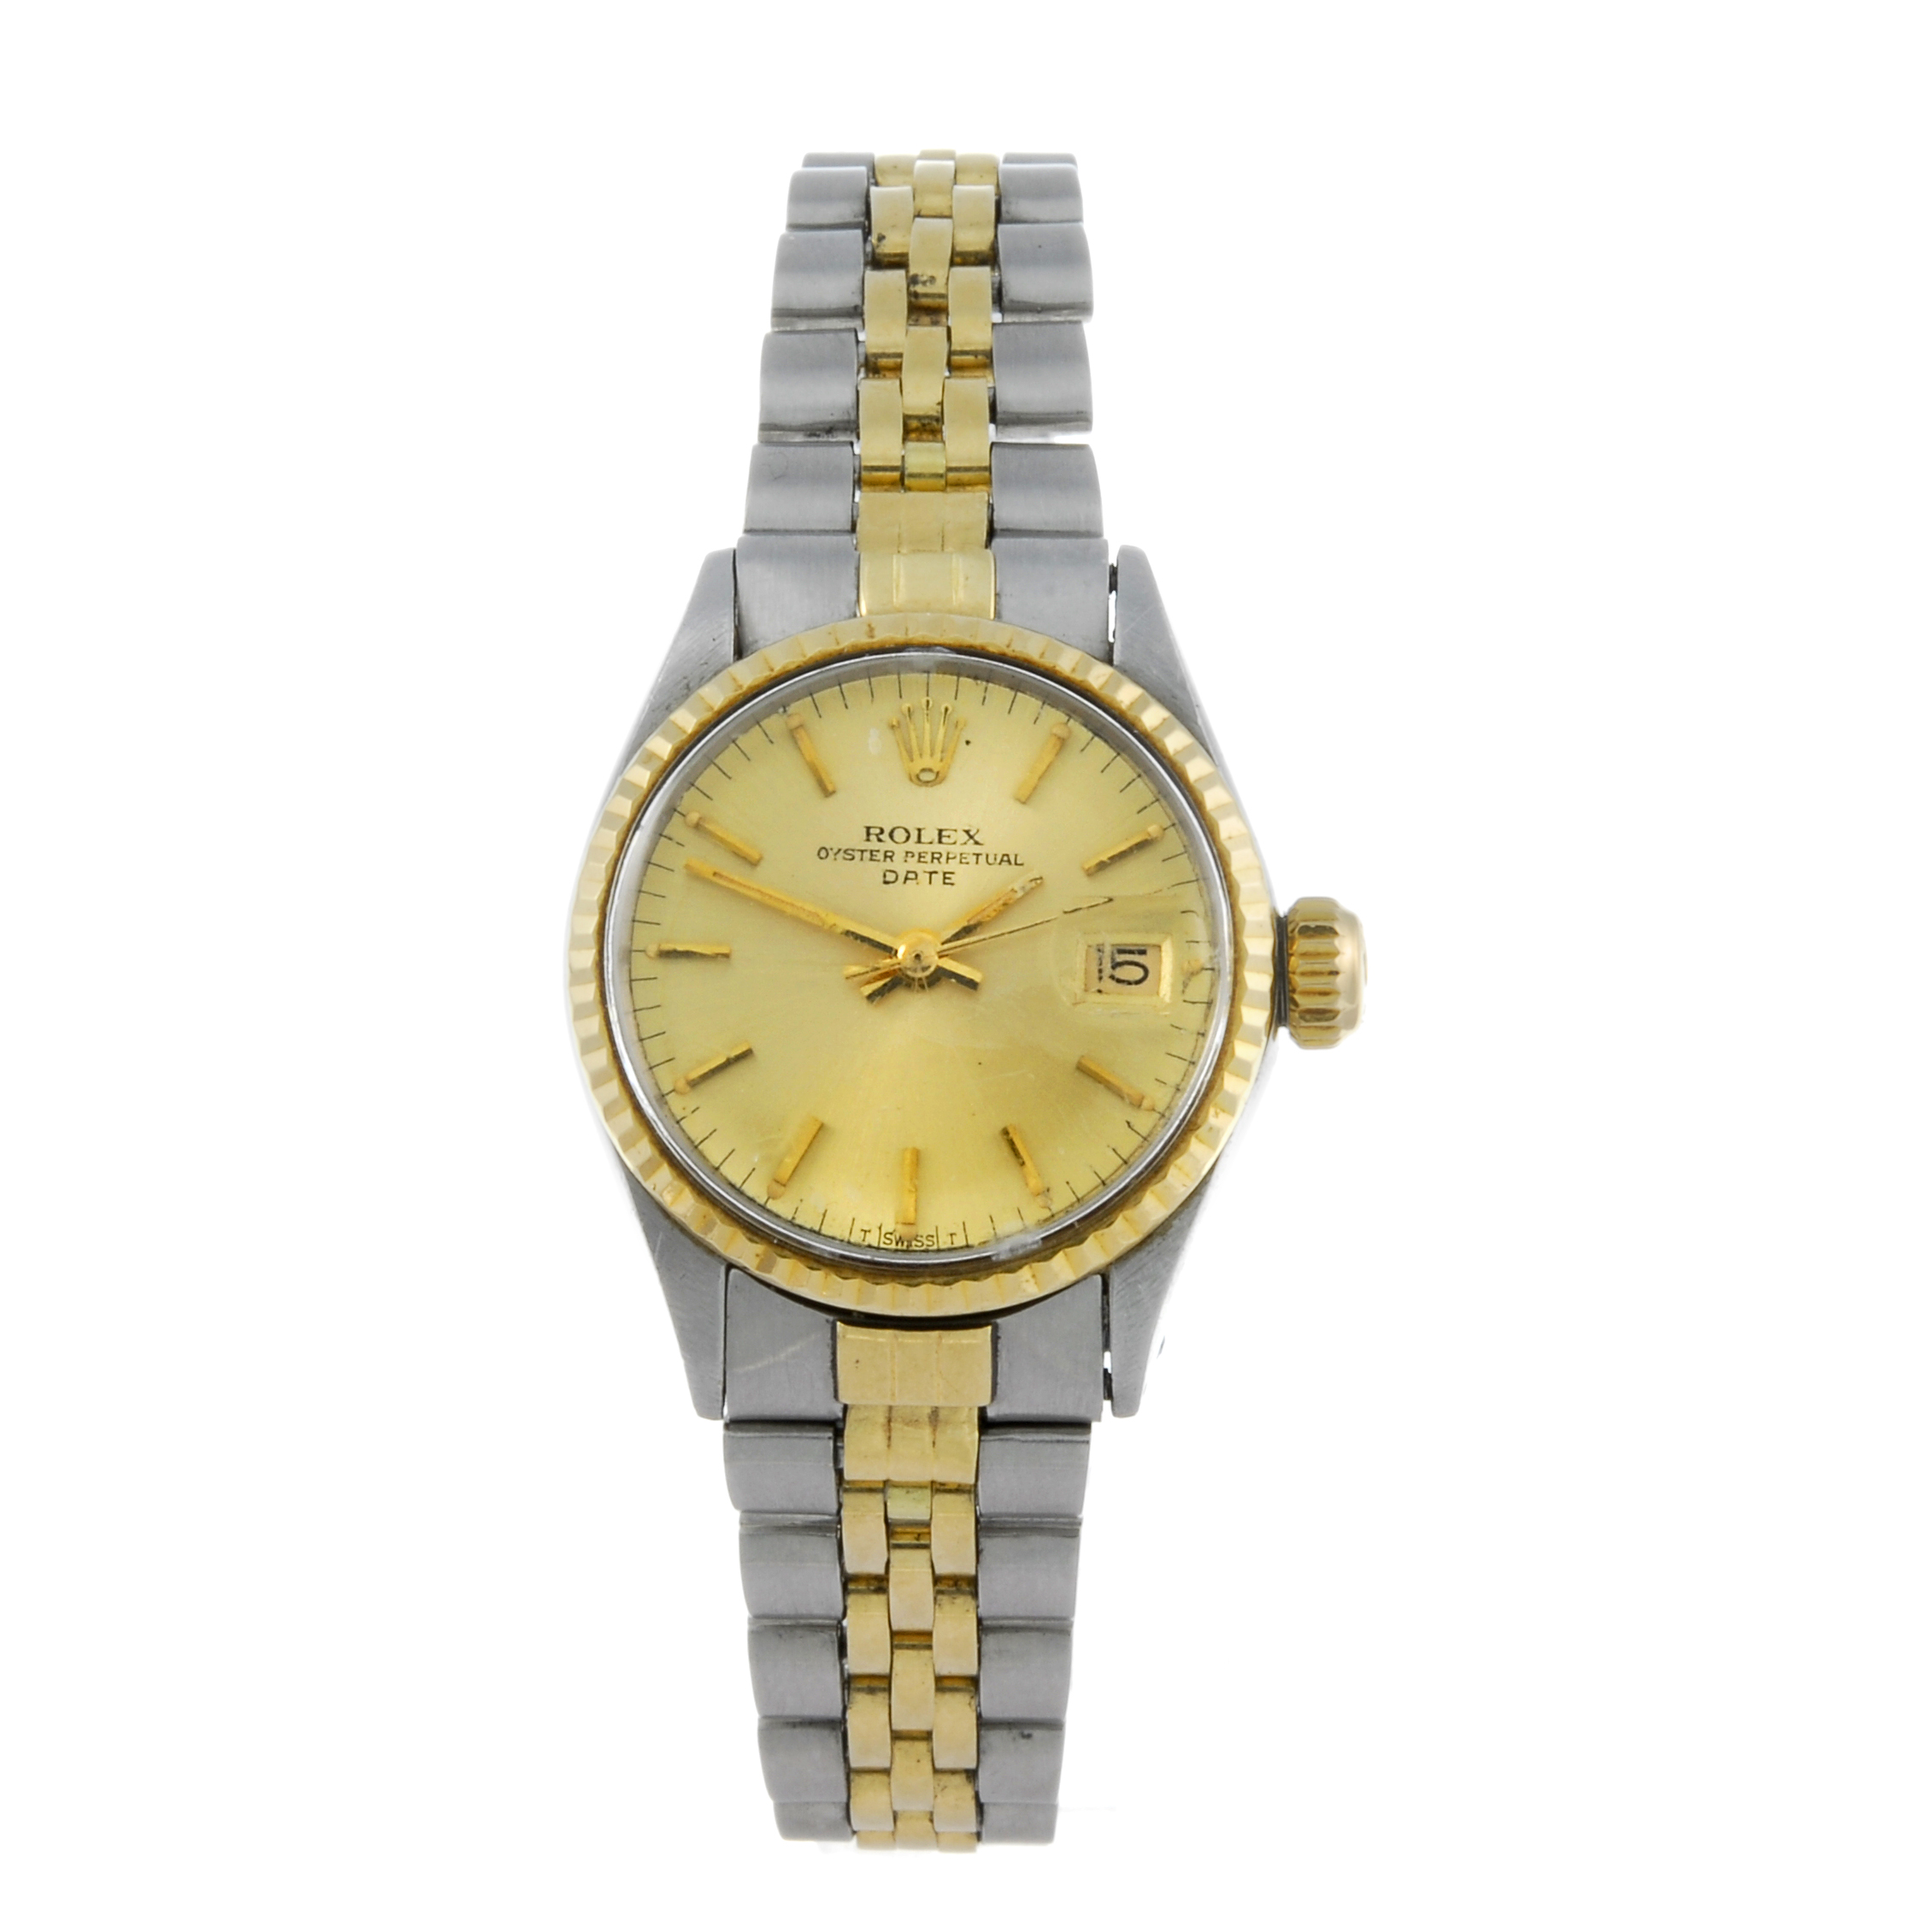 ROLEX - a lady's Oyster Perpetual Date bracelet watch. Circa 1968. Stainless steel case with